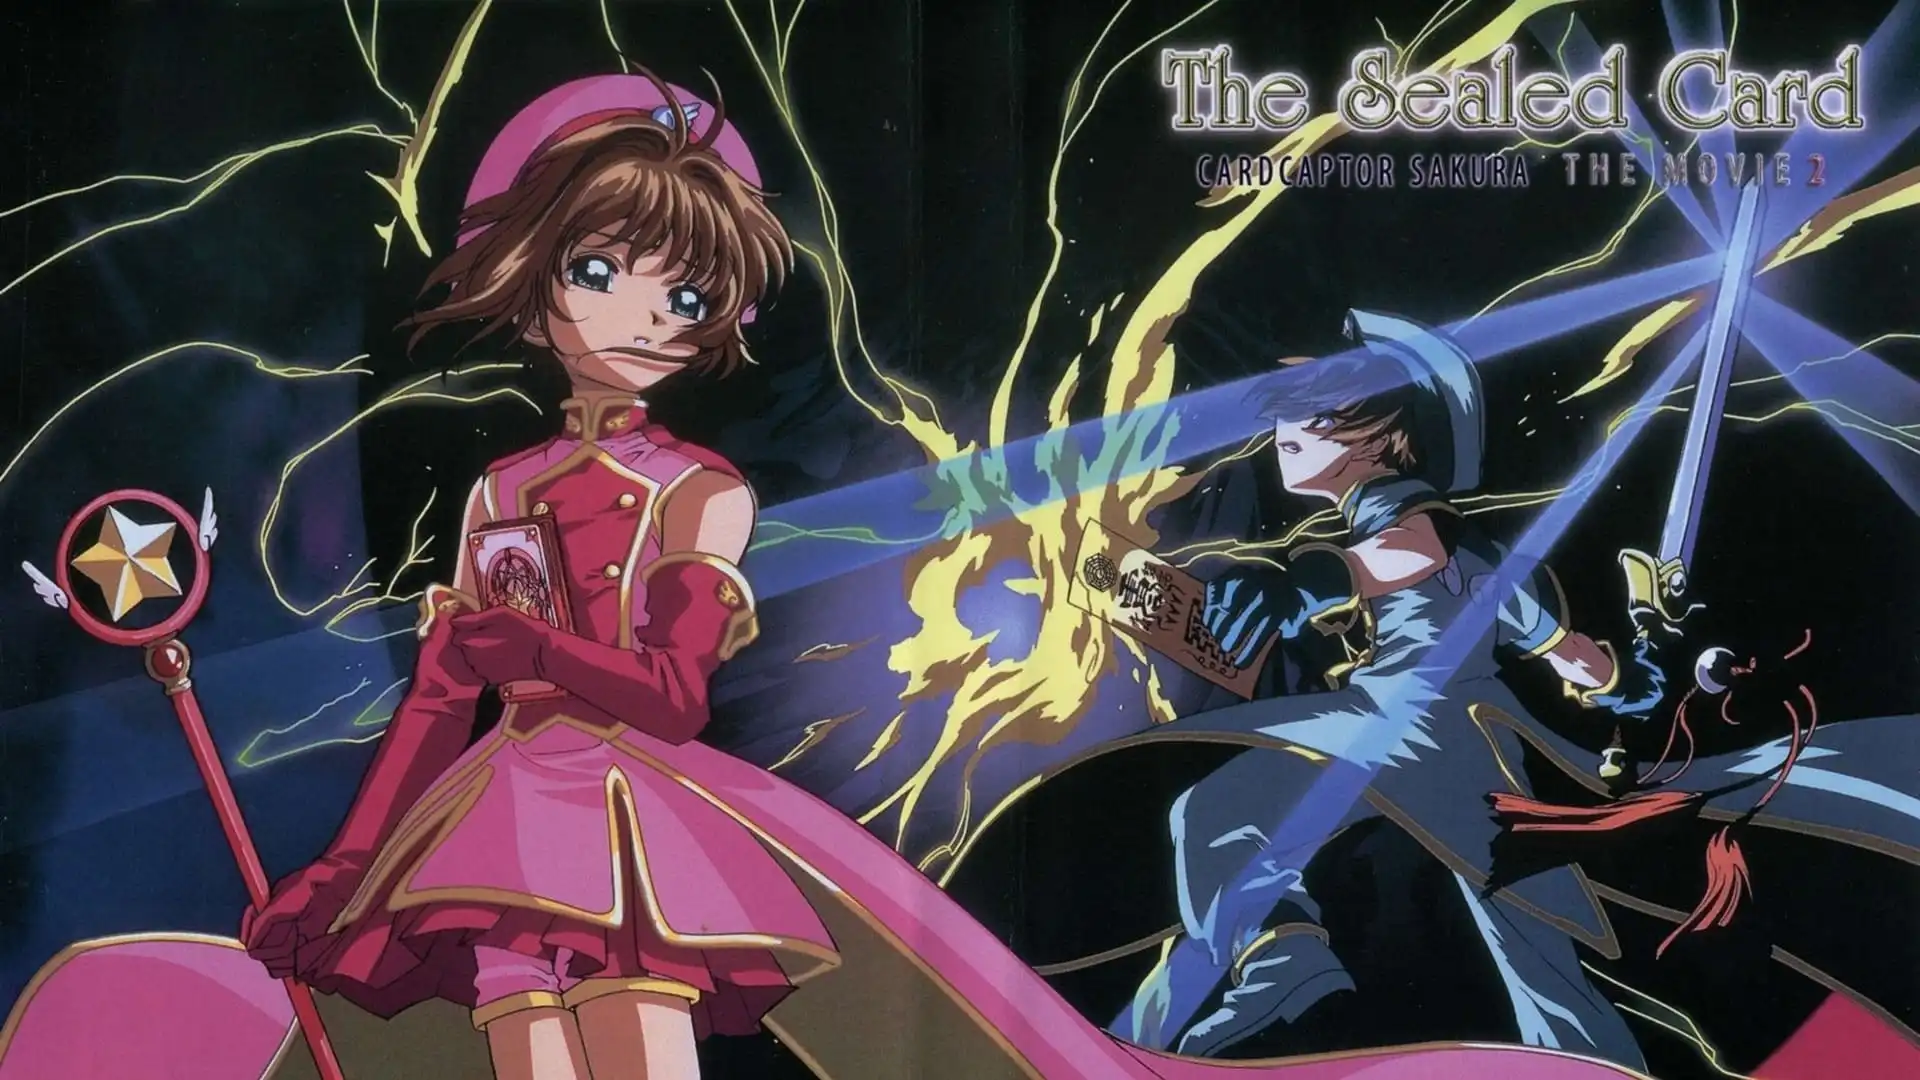 Watch and Download Cardcaptor Sakura: The Sealed Card 1